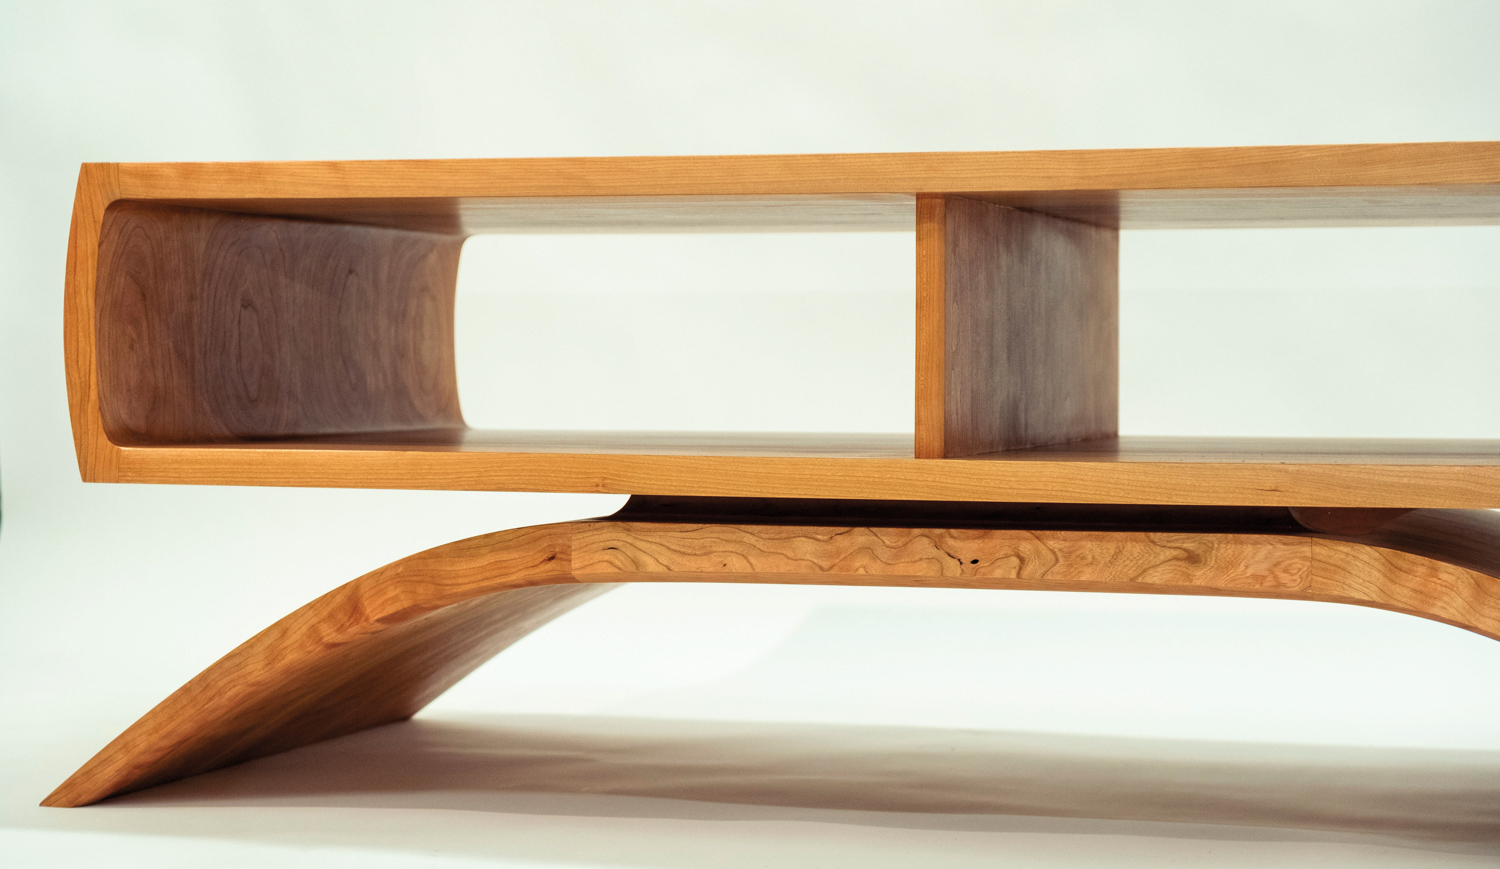 Detail shot of a wooden coffee table by Kevin Anderson